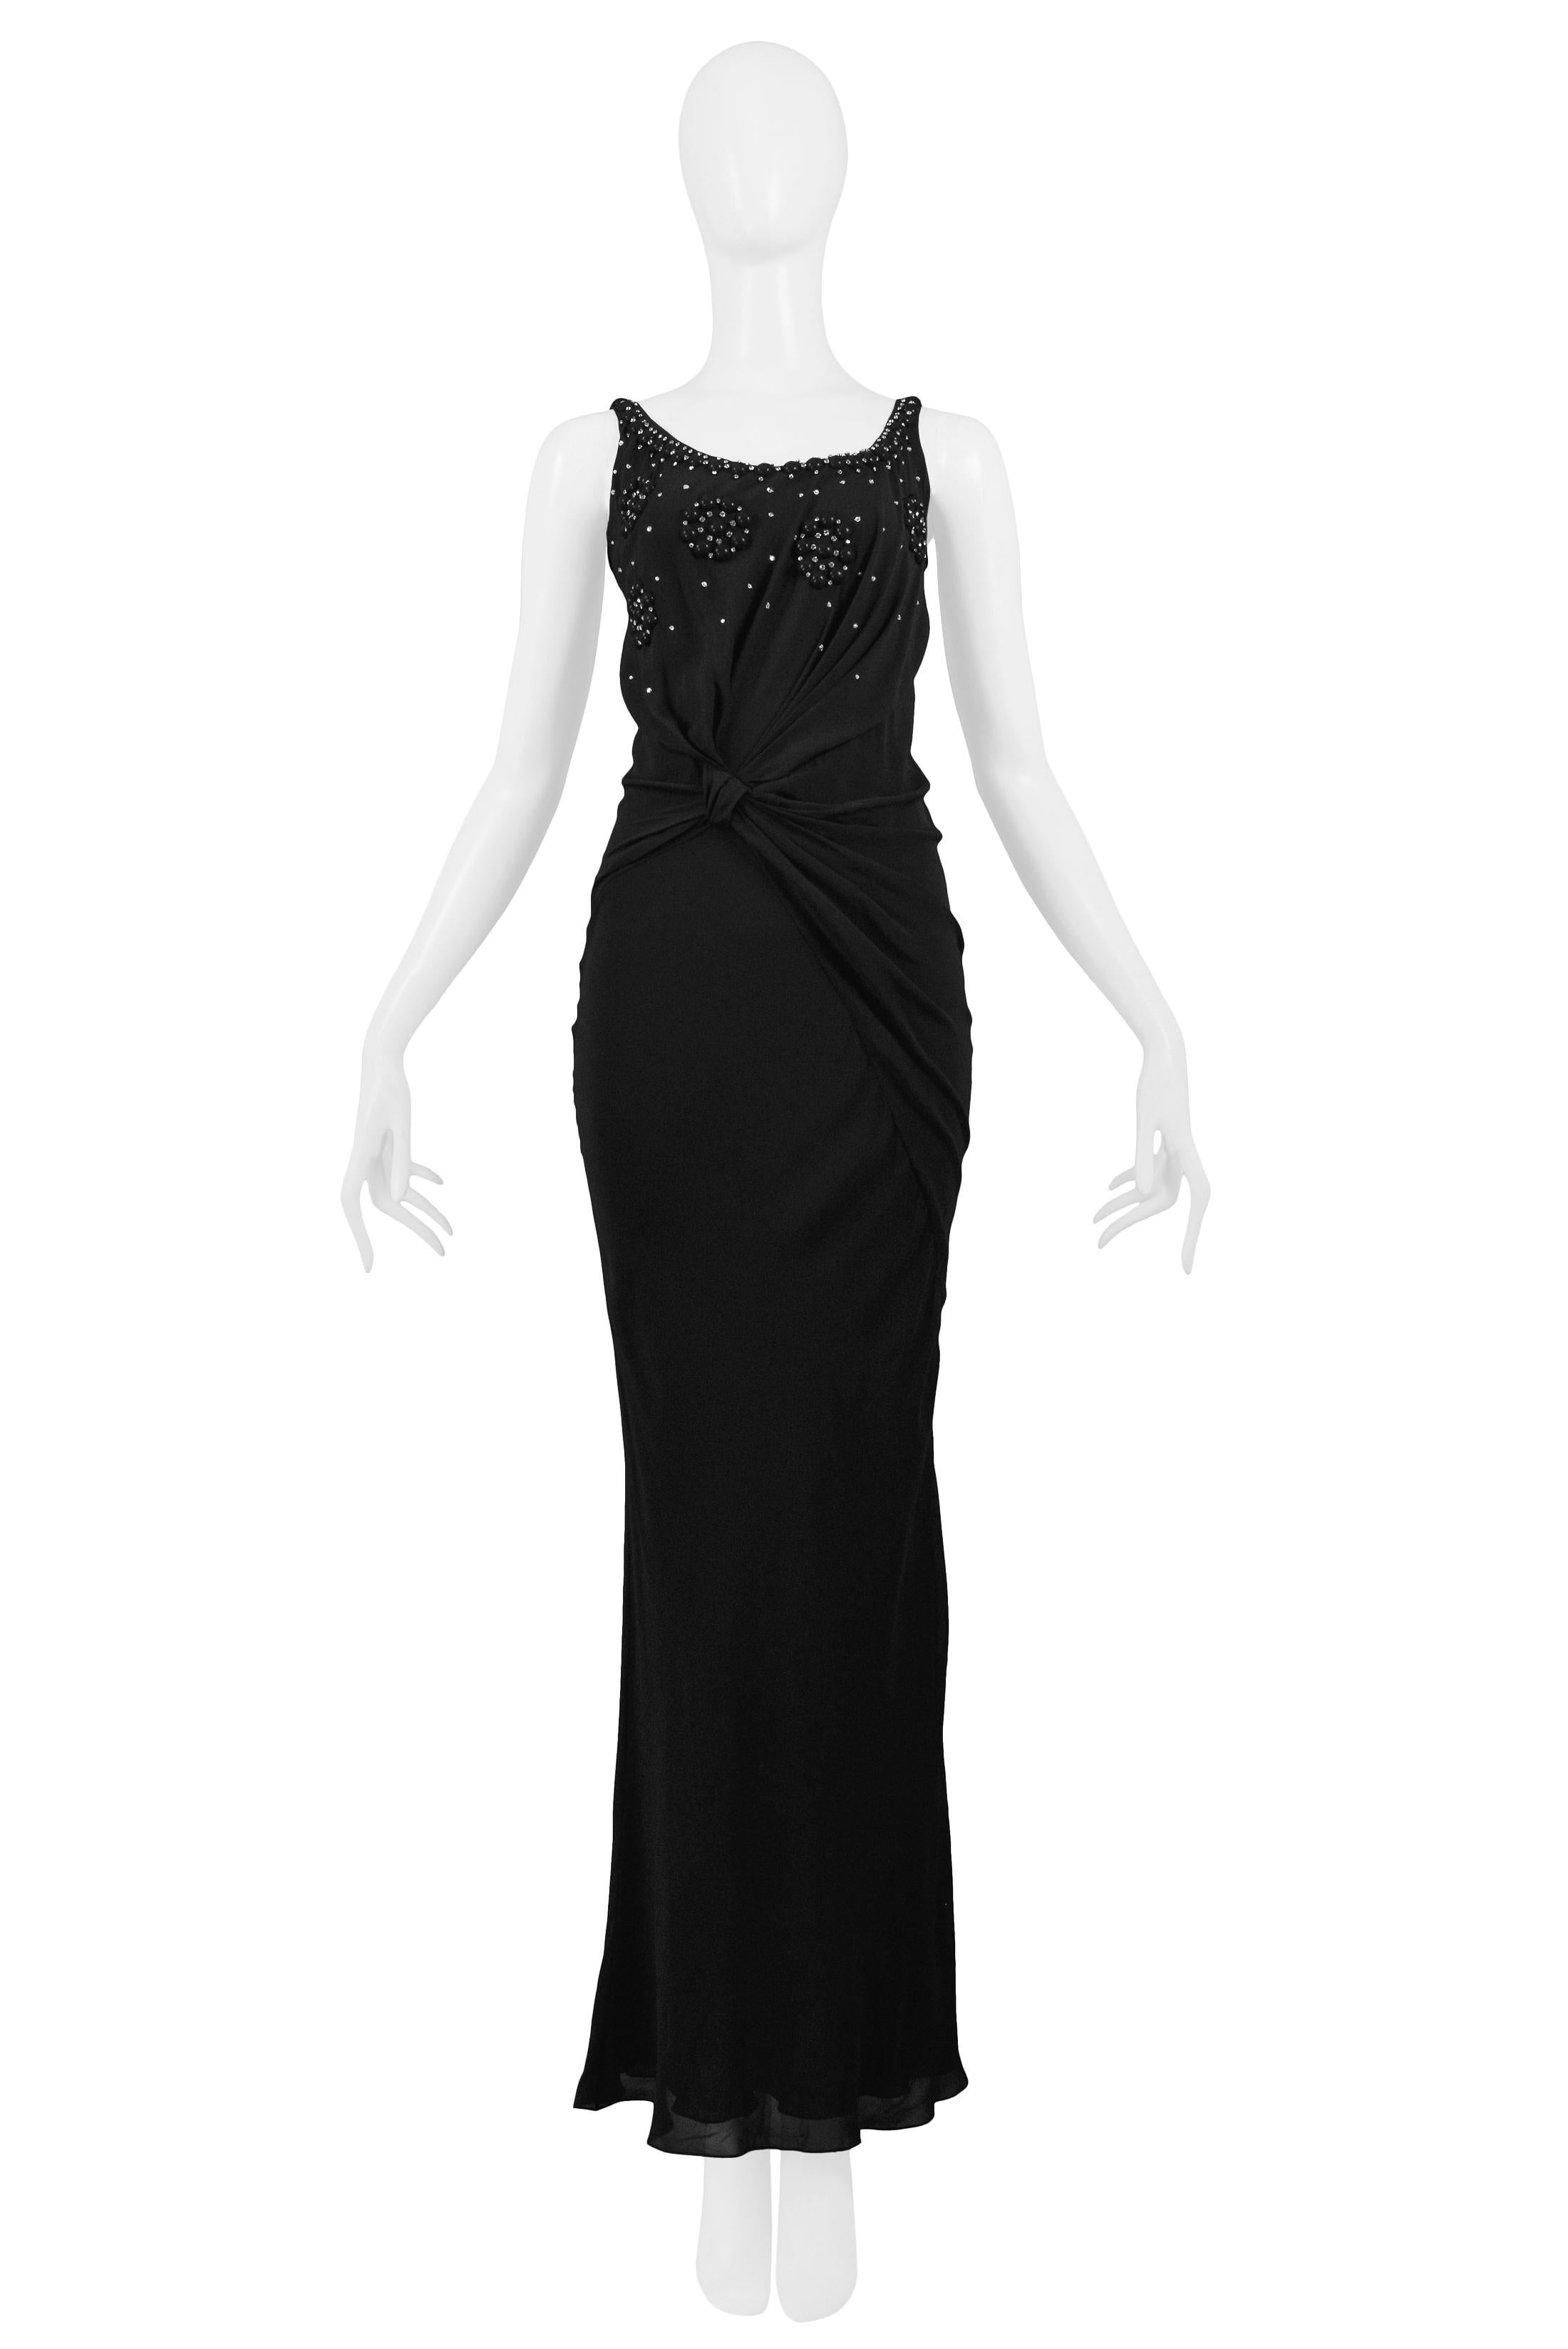 Christian Dior by Galliano Old Hollywood Black Knot Gown with ...